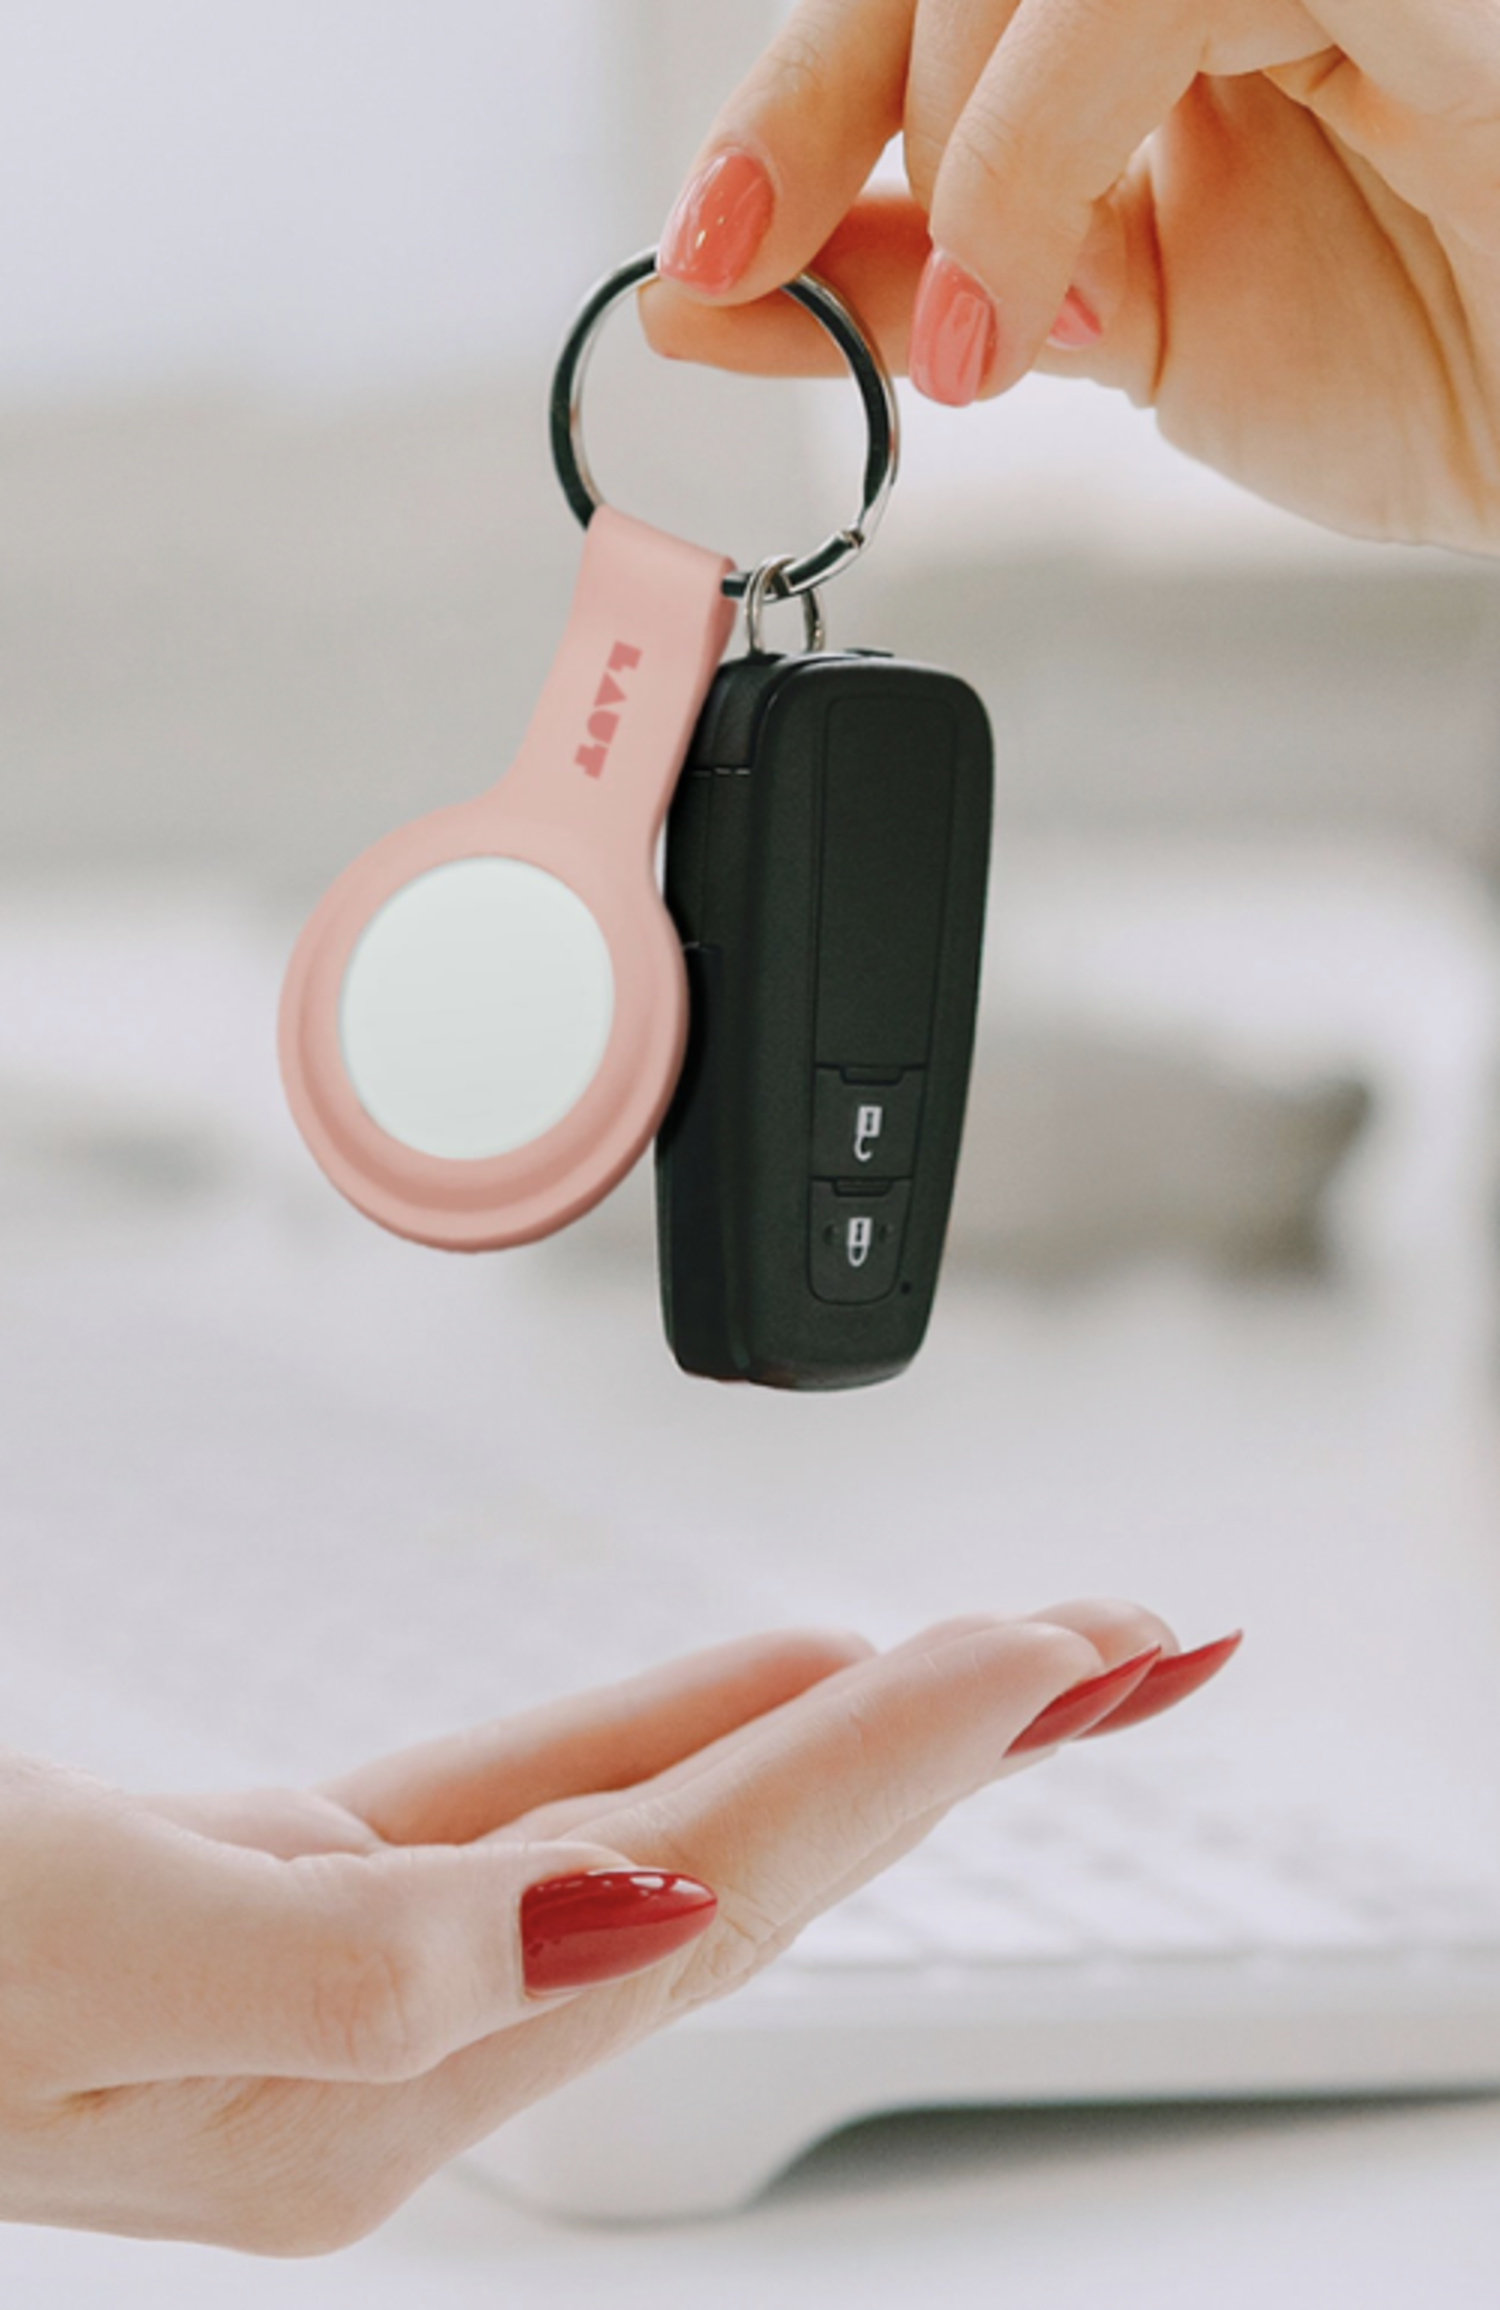 Save Your Fingers with the 2nd Generation Keyring from Orbitkey